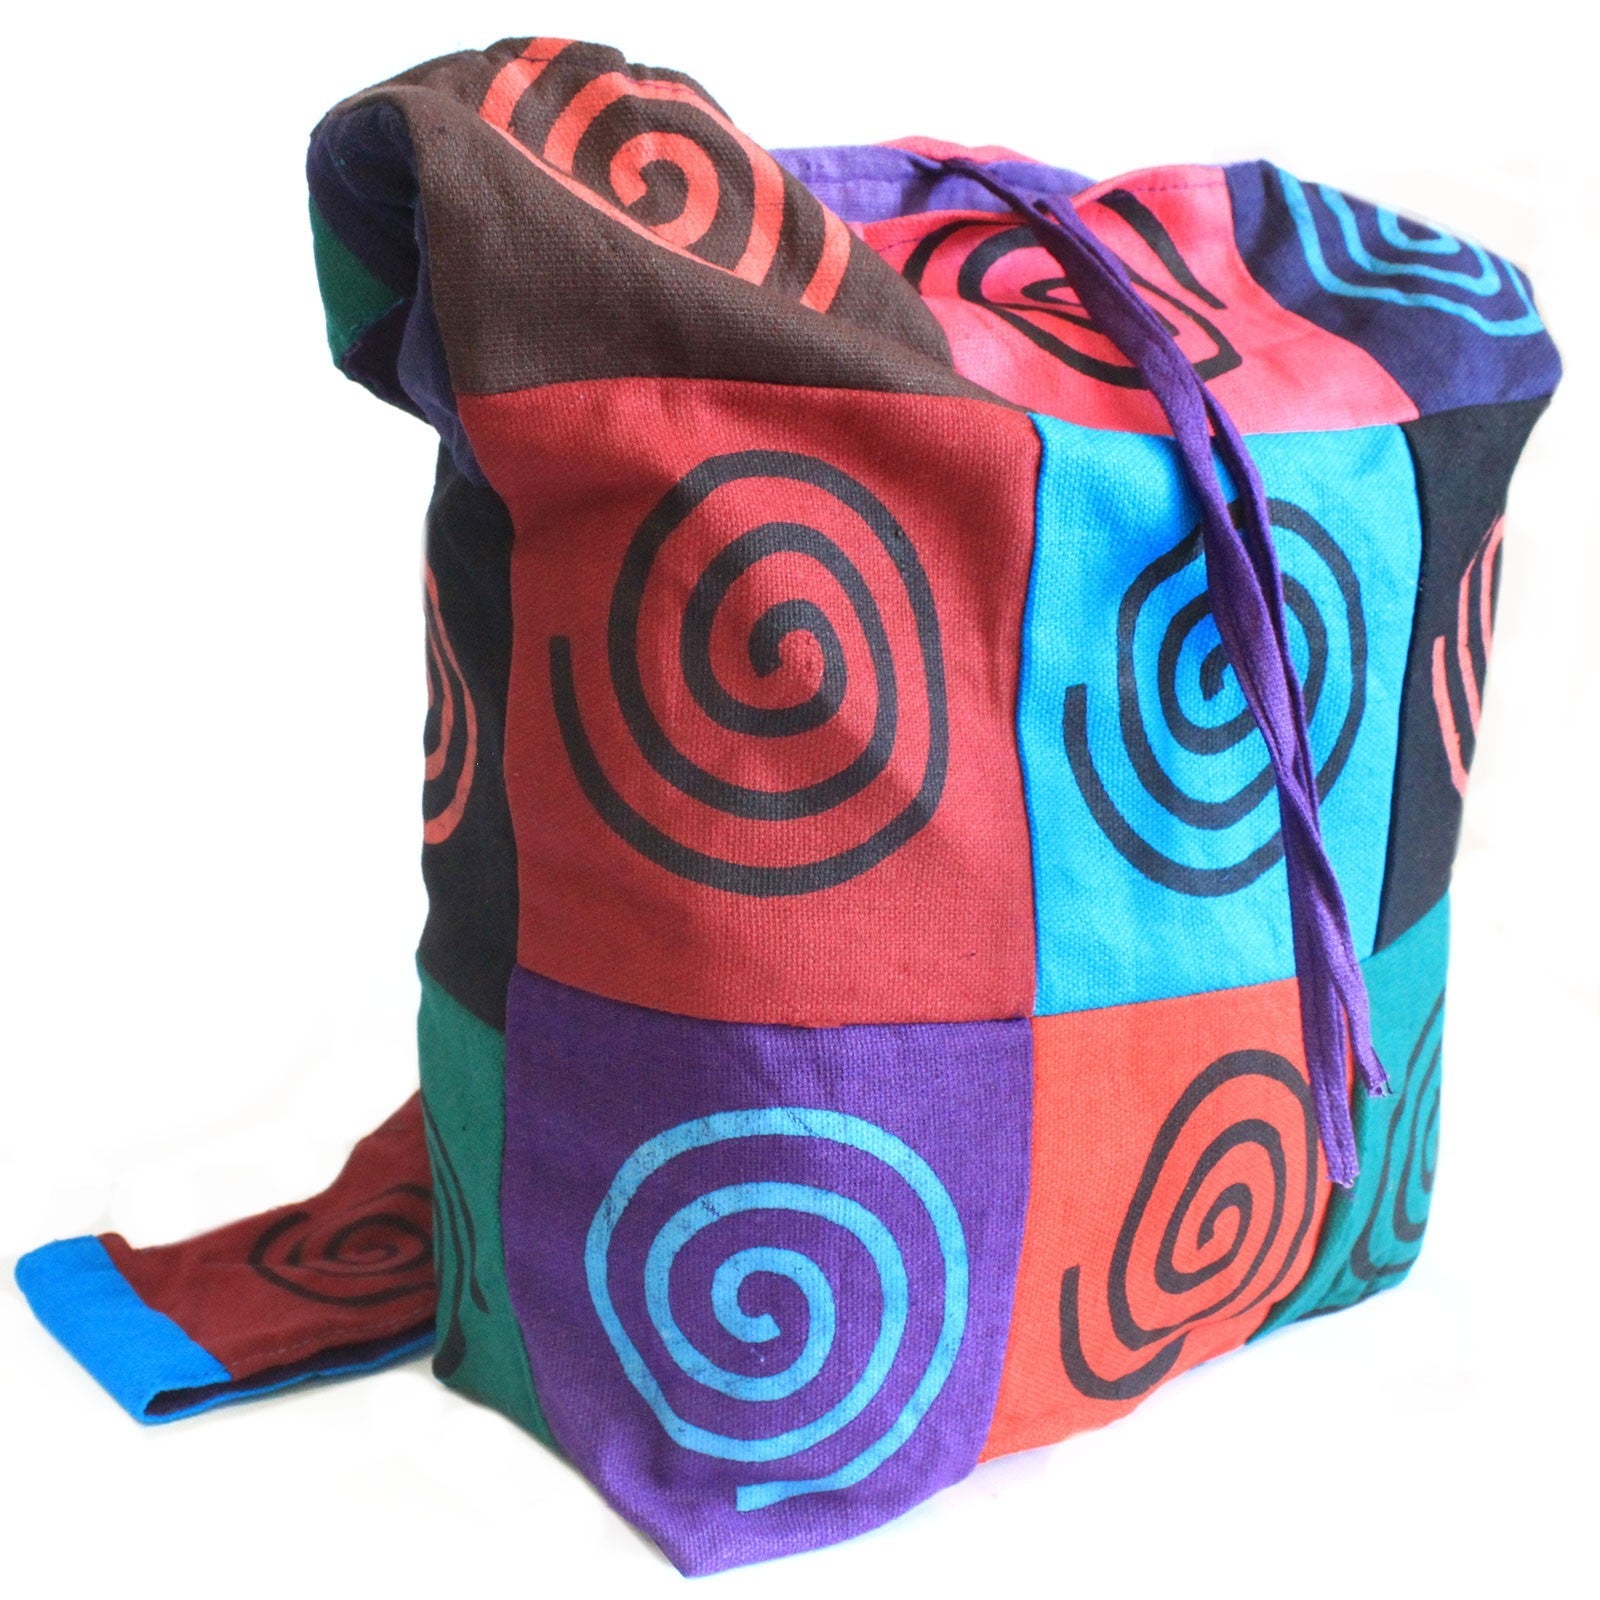 Cotton Patch Spiral Sling Bags - Ultrabee